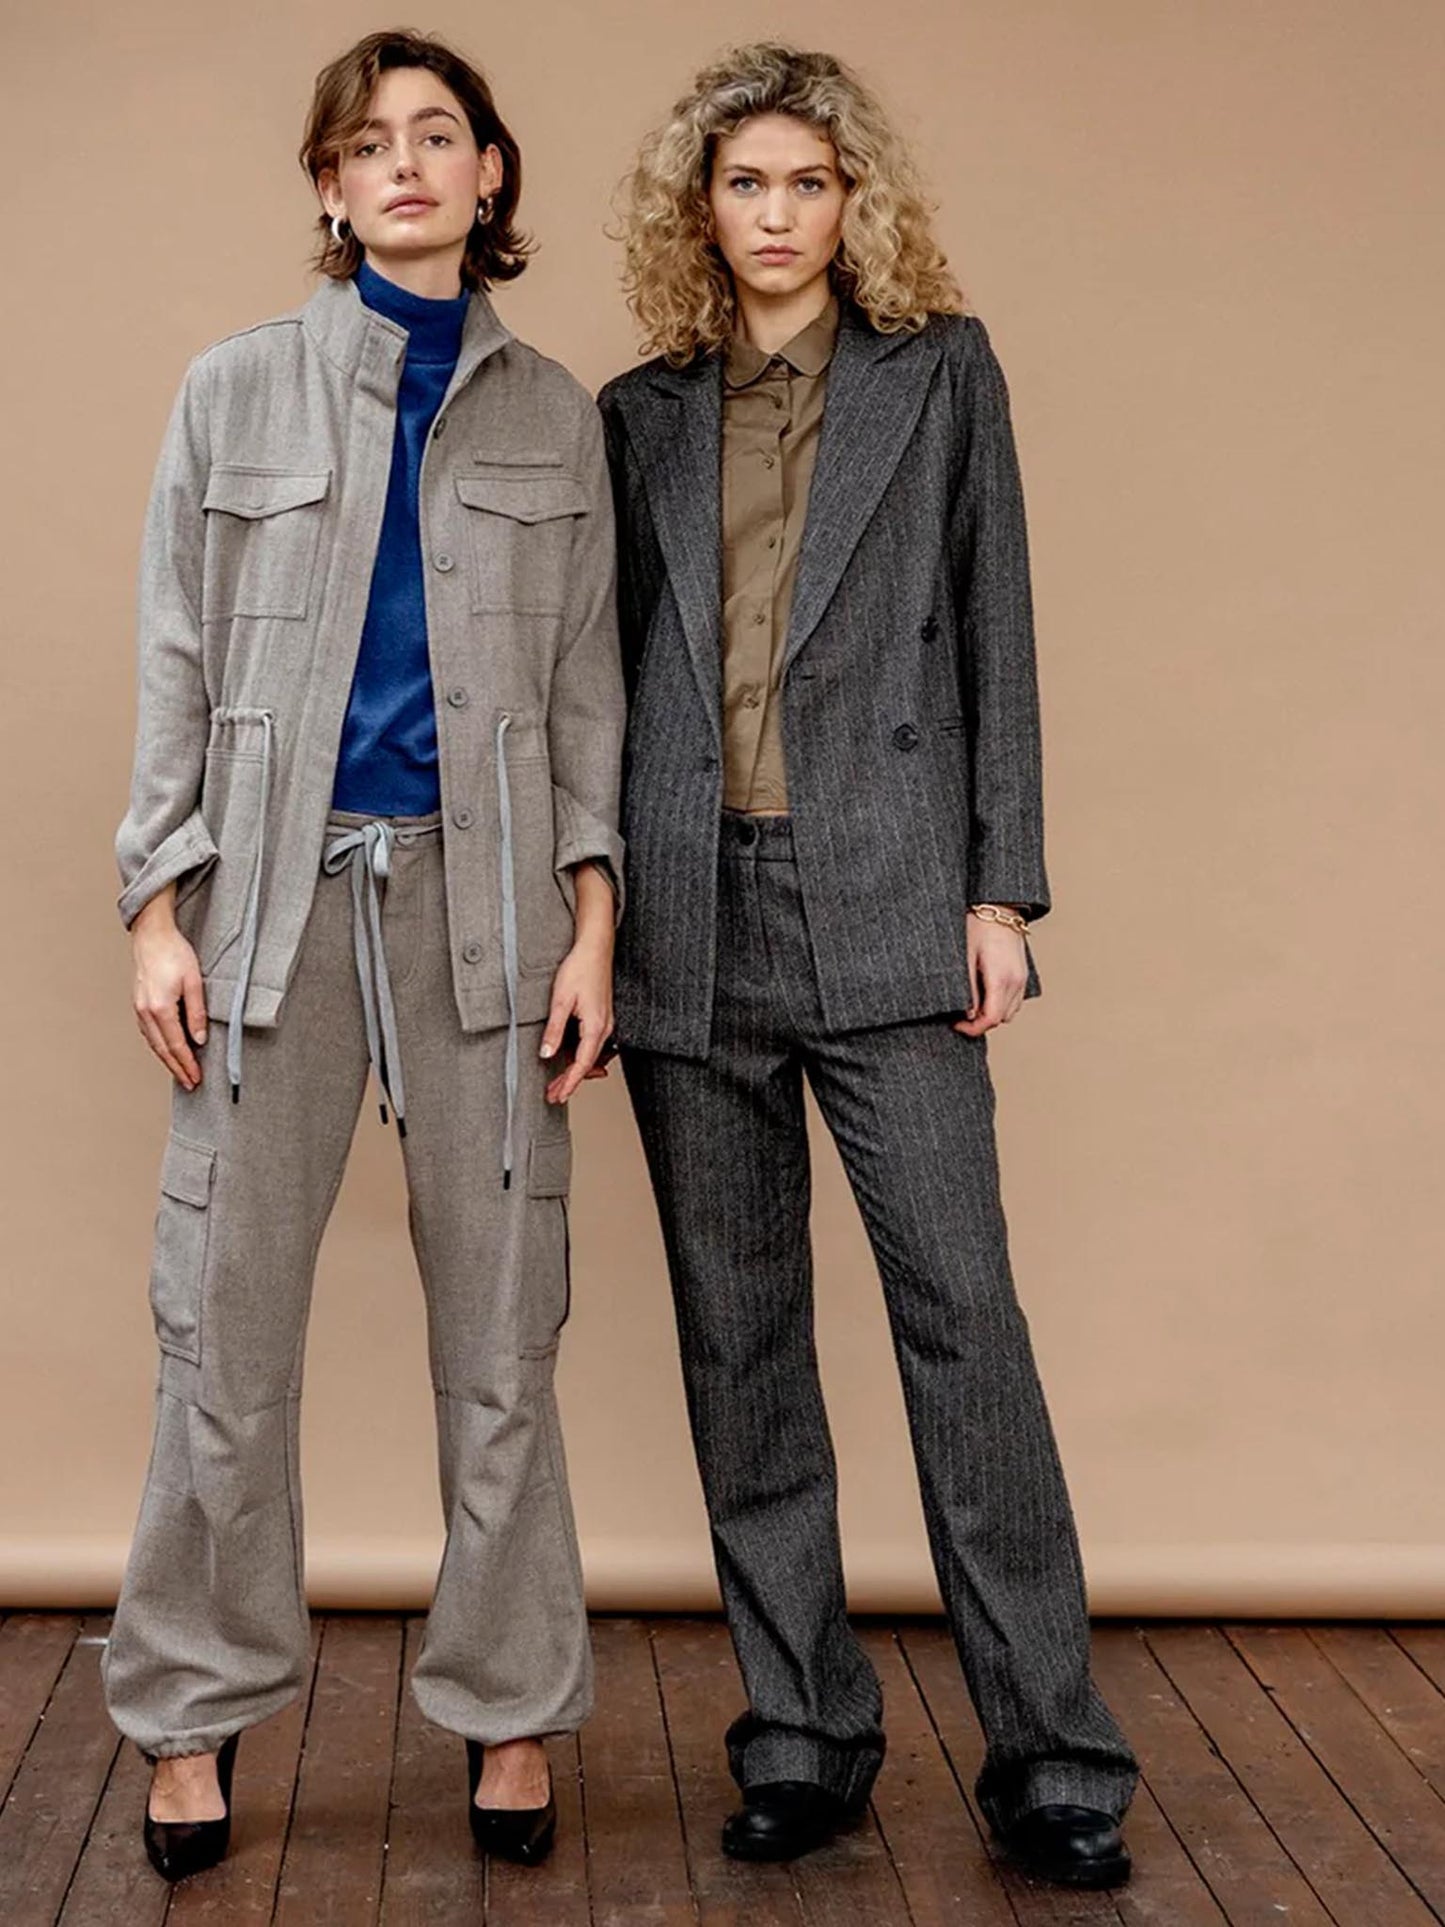 Two models wearing suits from Project AJ117 in grey tones from the Autumn/Winter 23 collection